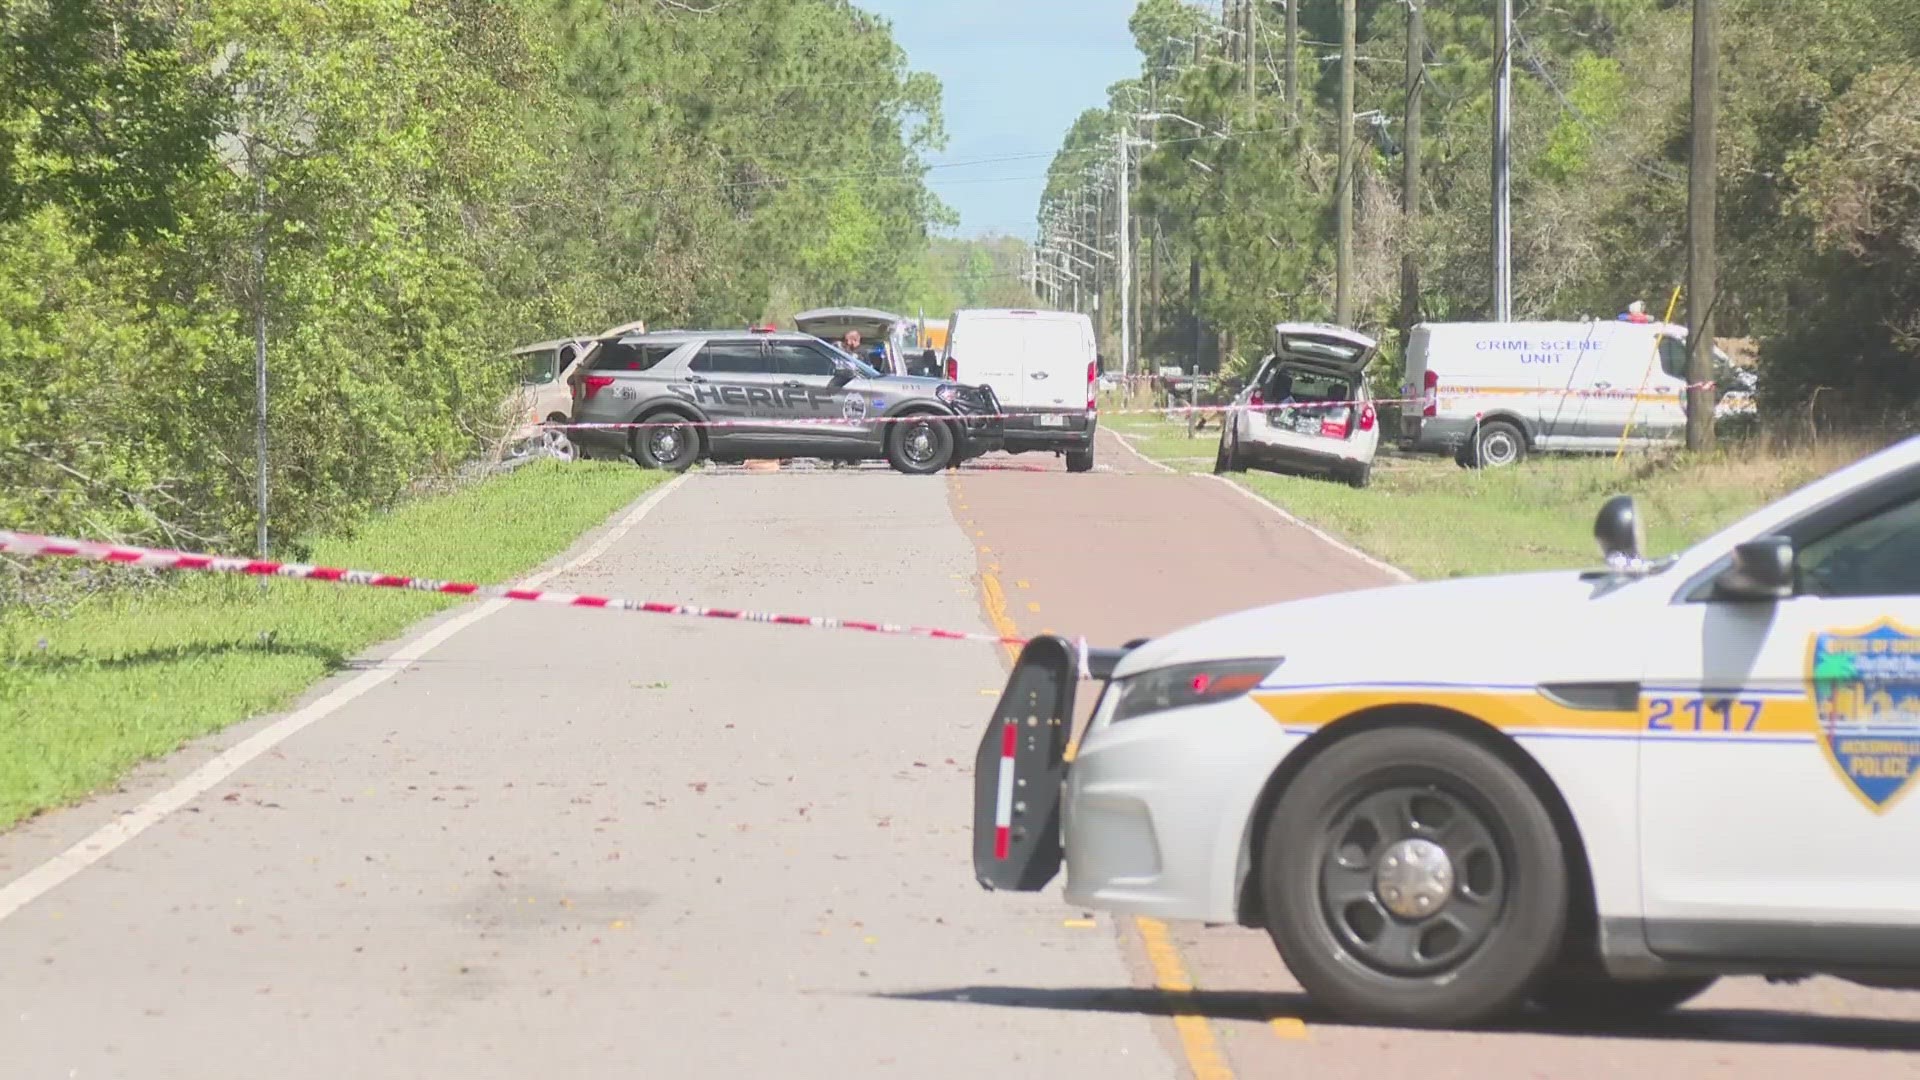 Sawpit Road was closed for hours as police investigated a fatal crash Saturday morning.